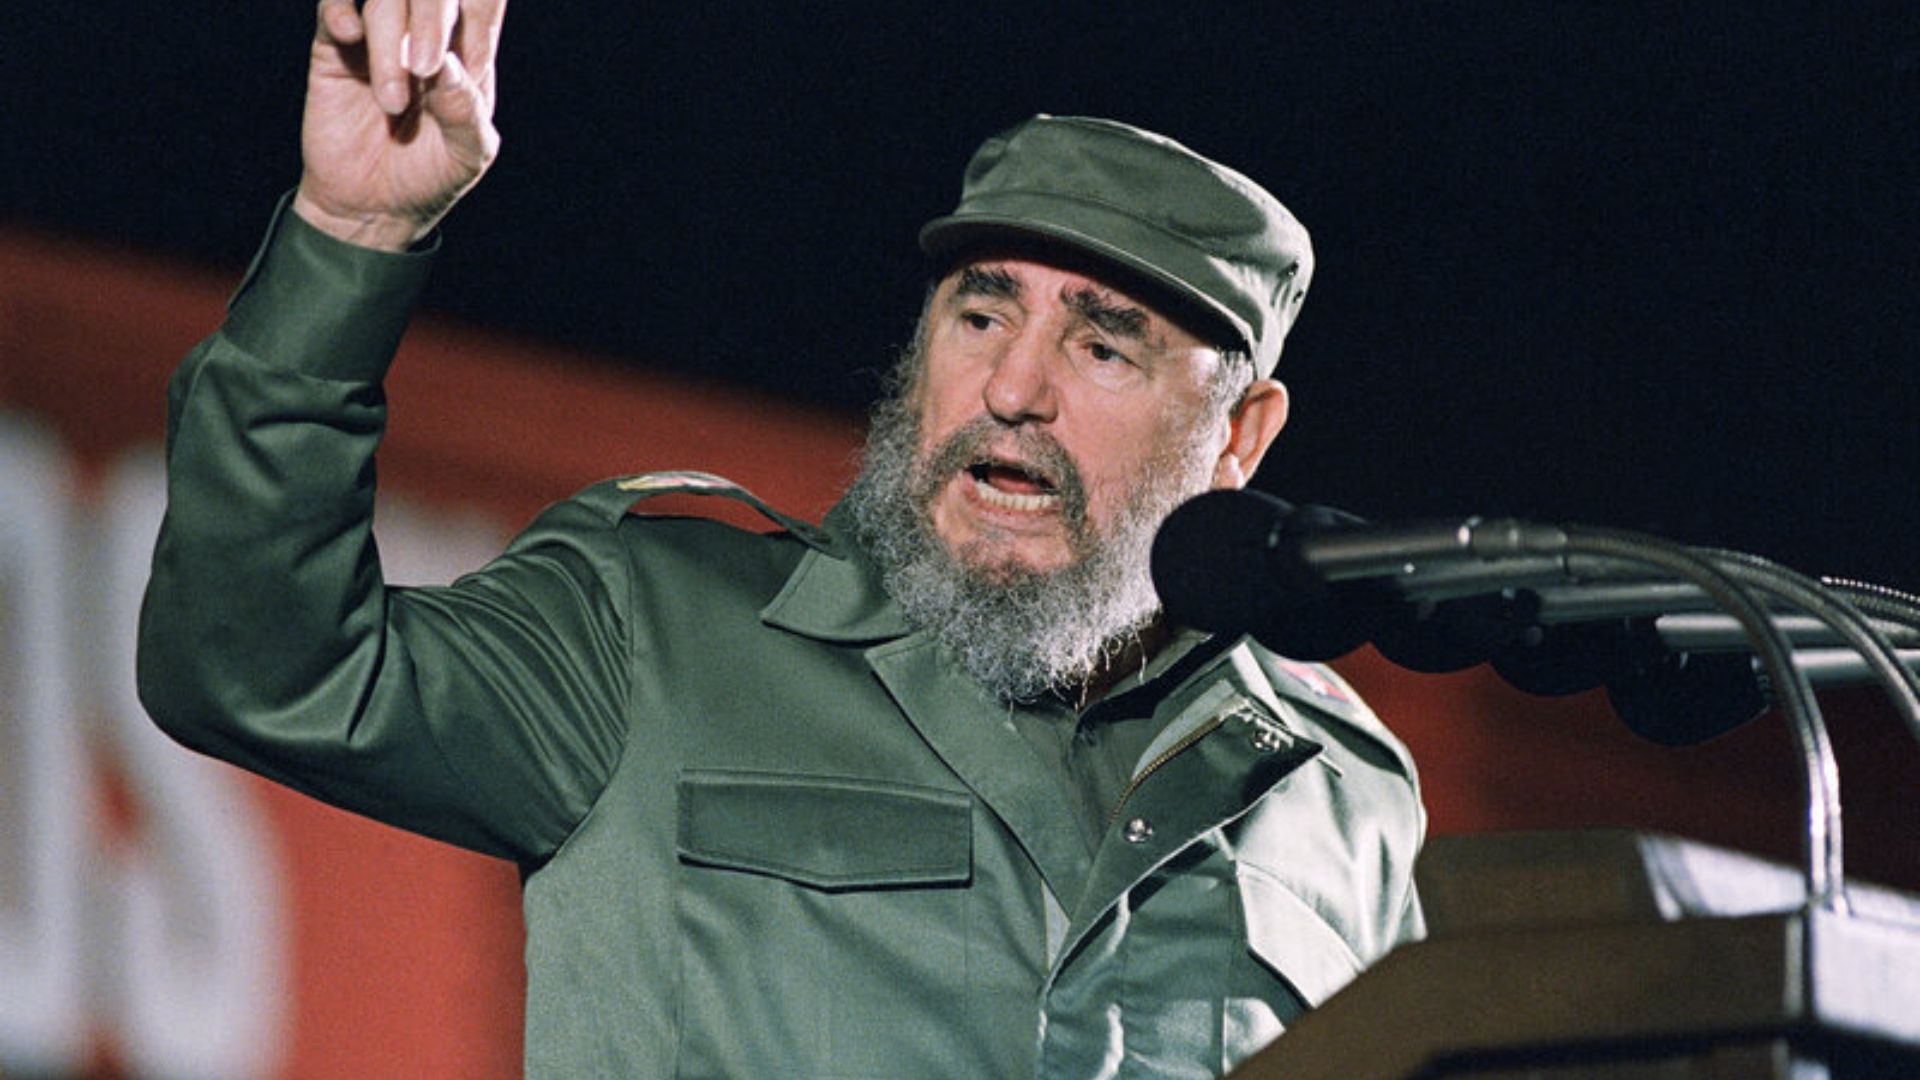 Fidel Castro In Military Suit Giving A Speech